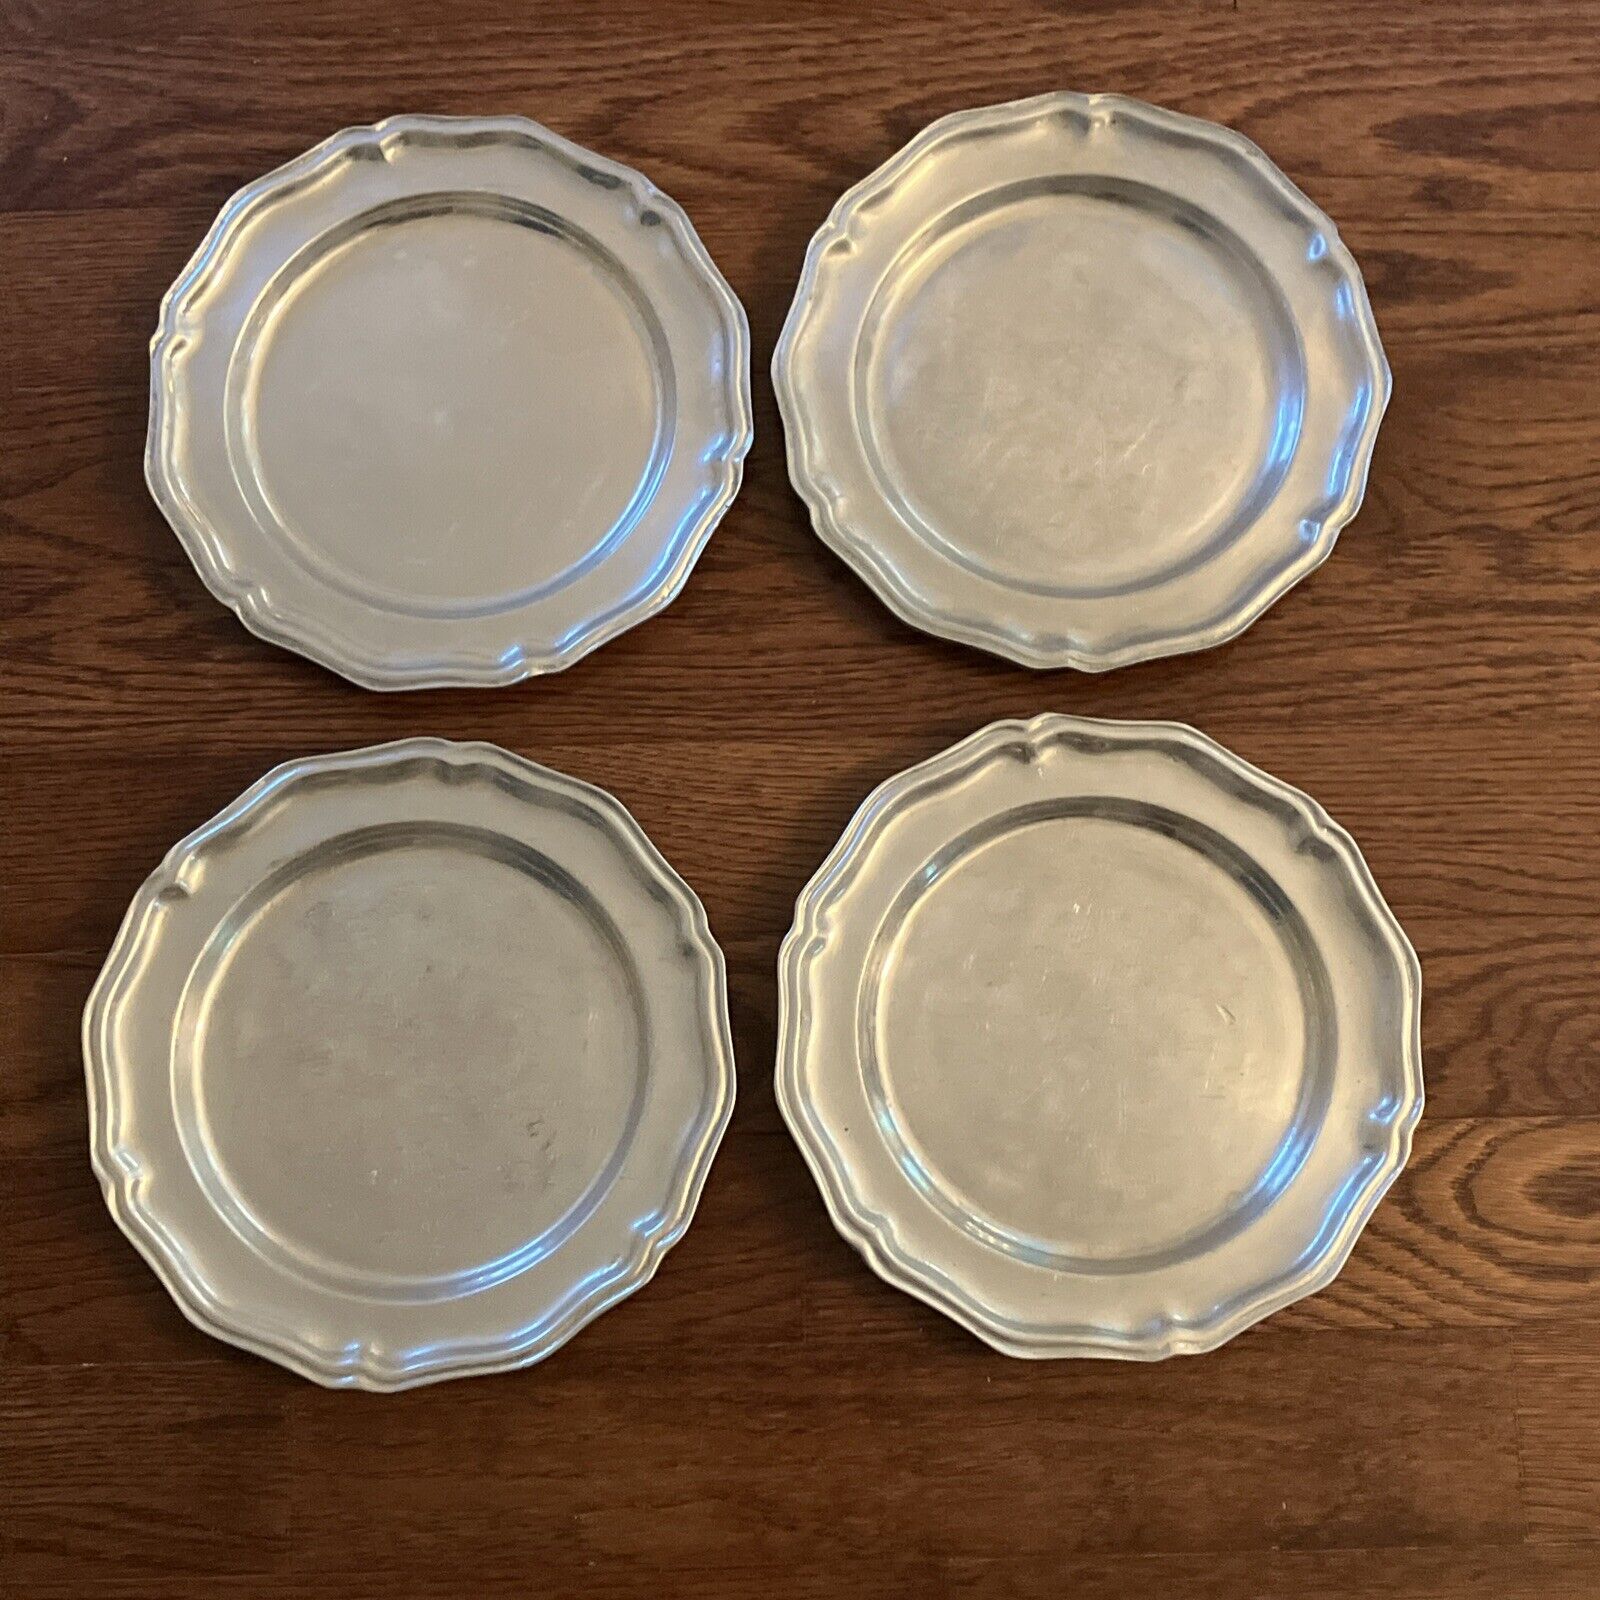 4 Wilton Armetale Country French 10 in Dinner Plates Matte Pewter RWP Aluminum